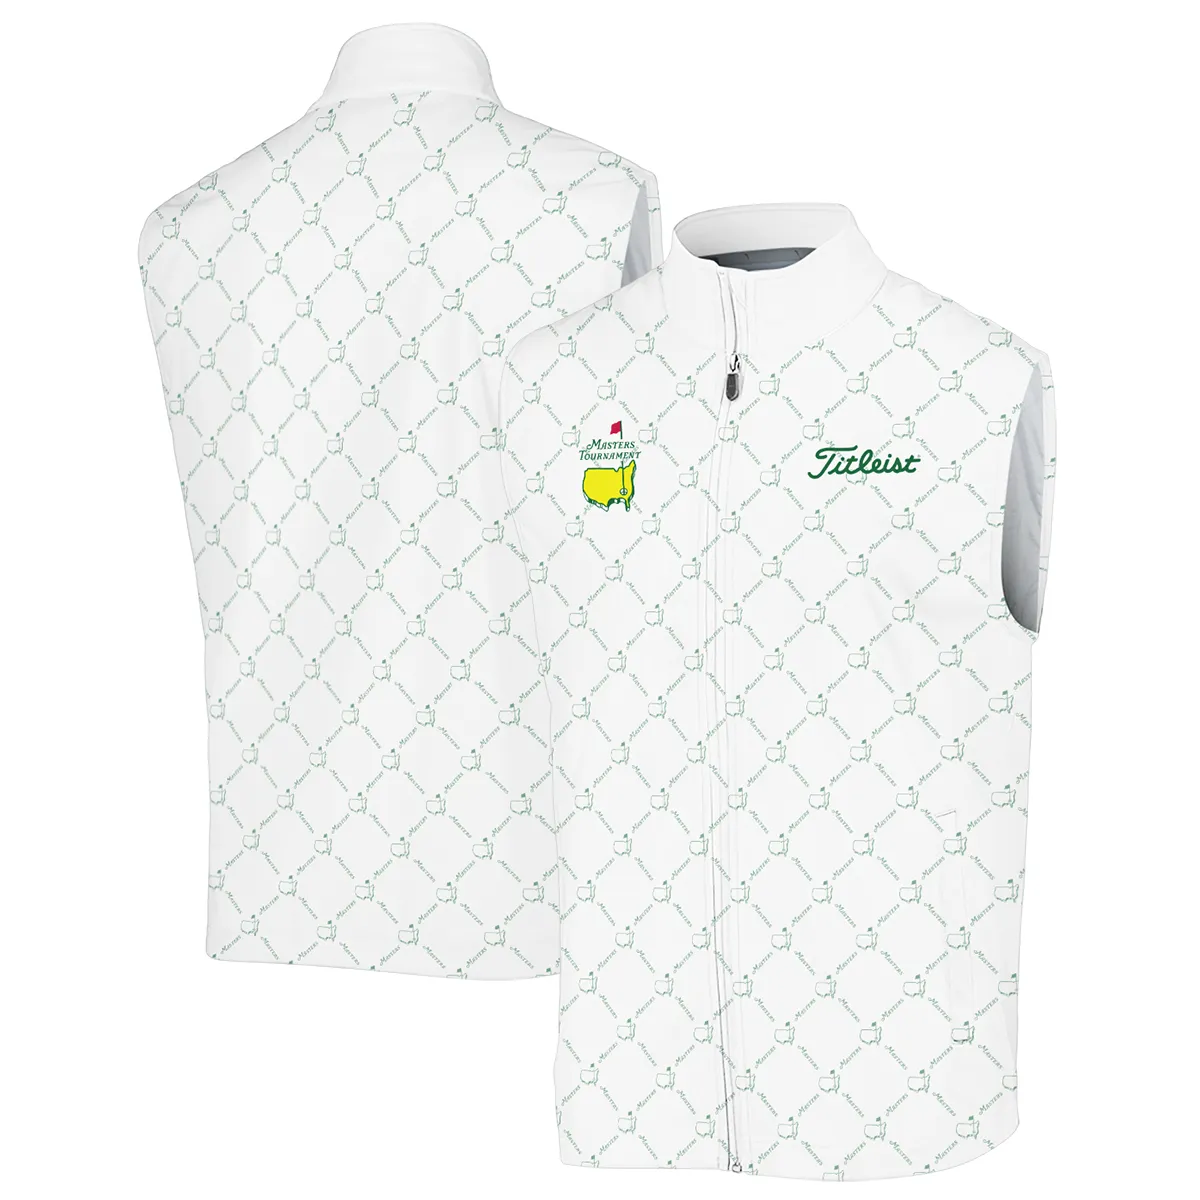 Golf Sport Pattern Color White Mix Masters Tournament Titleist Hoodie Shirt Style Classic